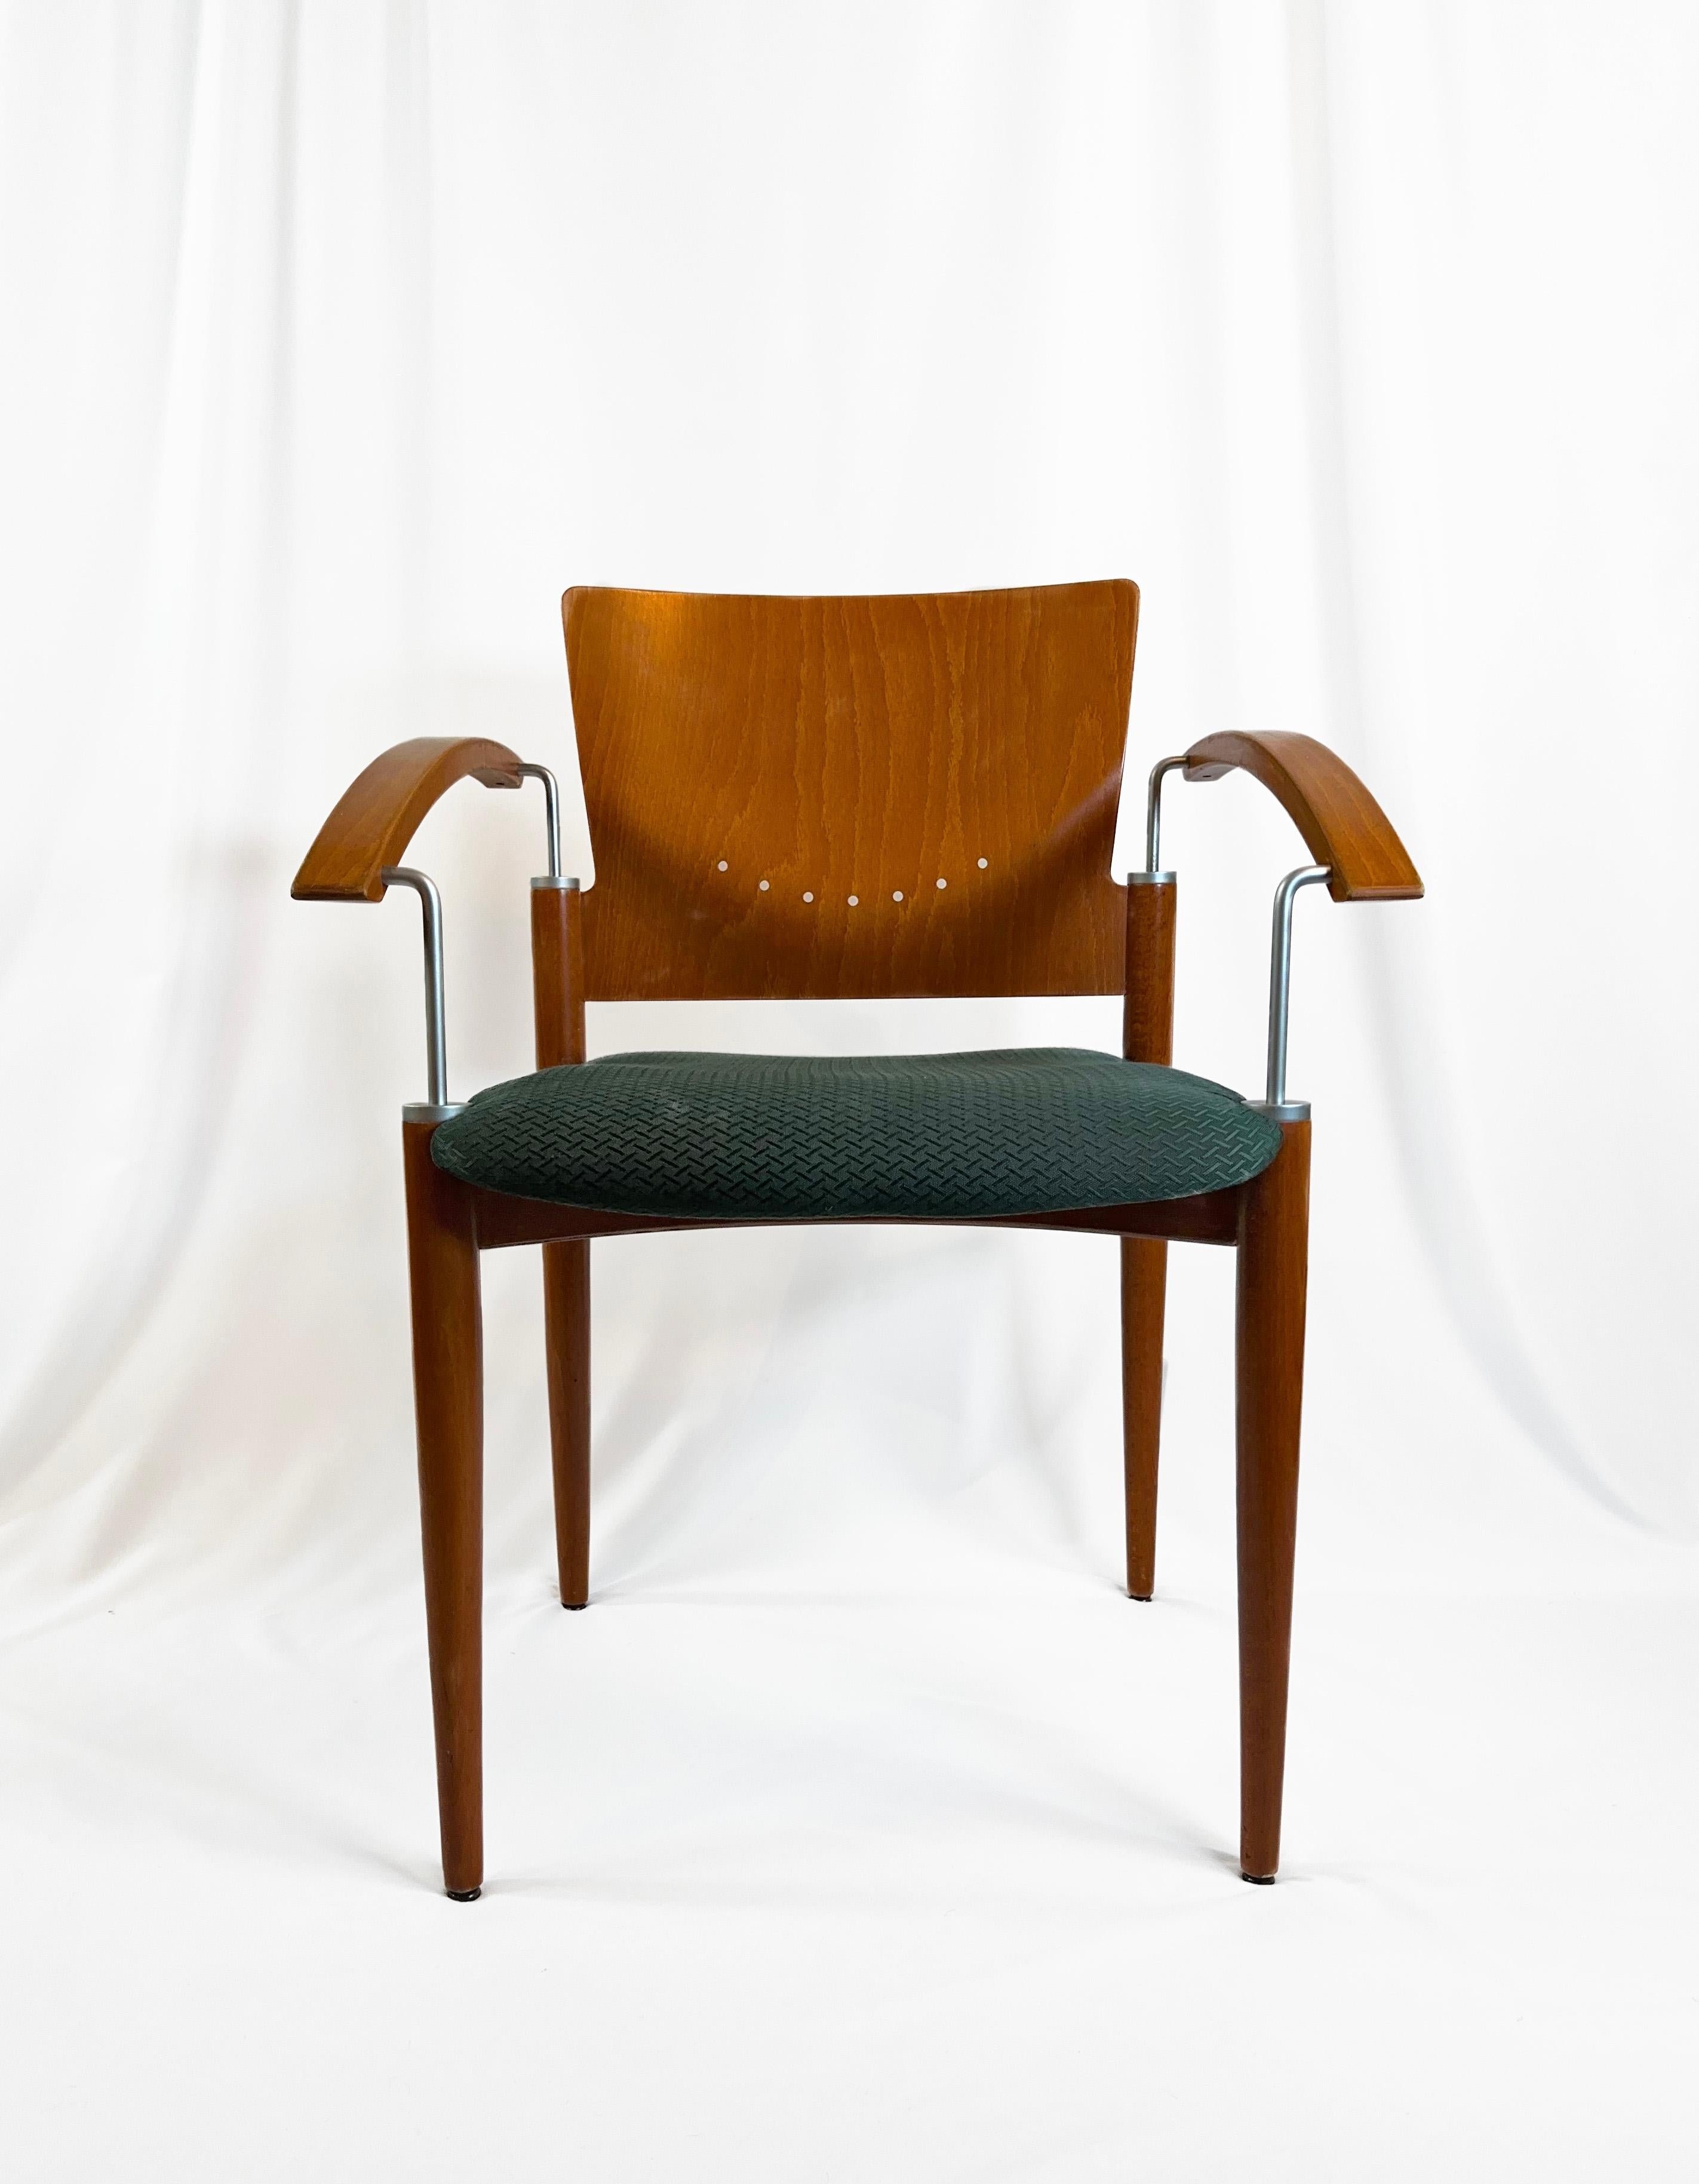 A collection of four Postmodern stackable dining chairs, attributed to Thonet, circa 1980s.

These chairs have been crafted using a blend of Beech Ply and Beech Wood, skilfully juxtaposed with contemporary metal rod accents.

Sweeping, curved beech